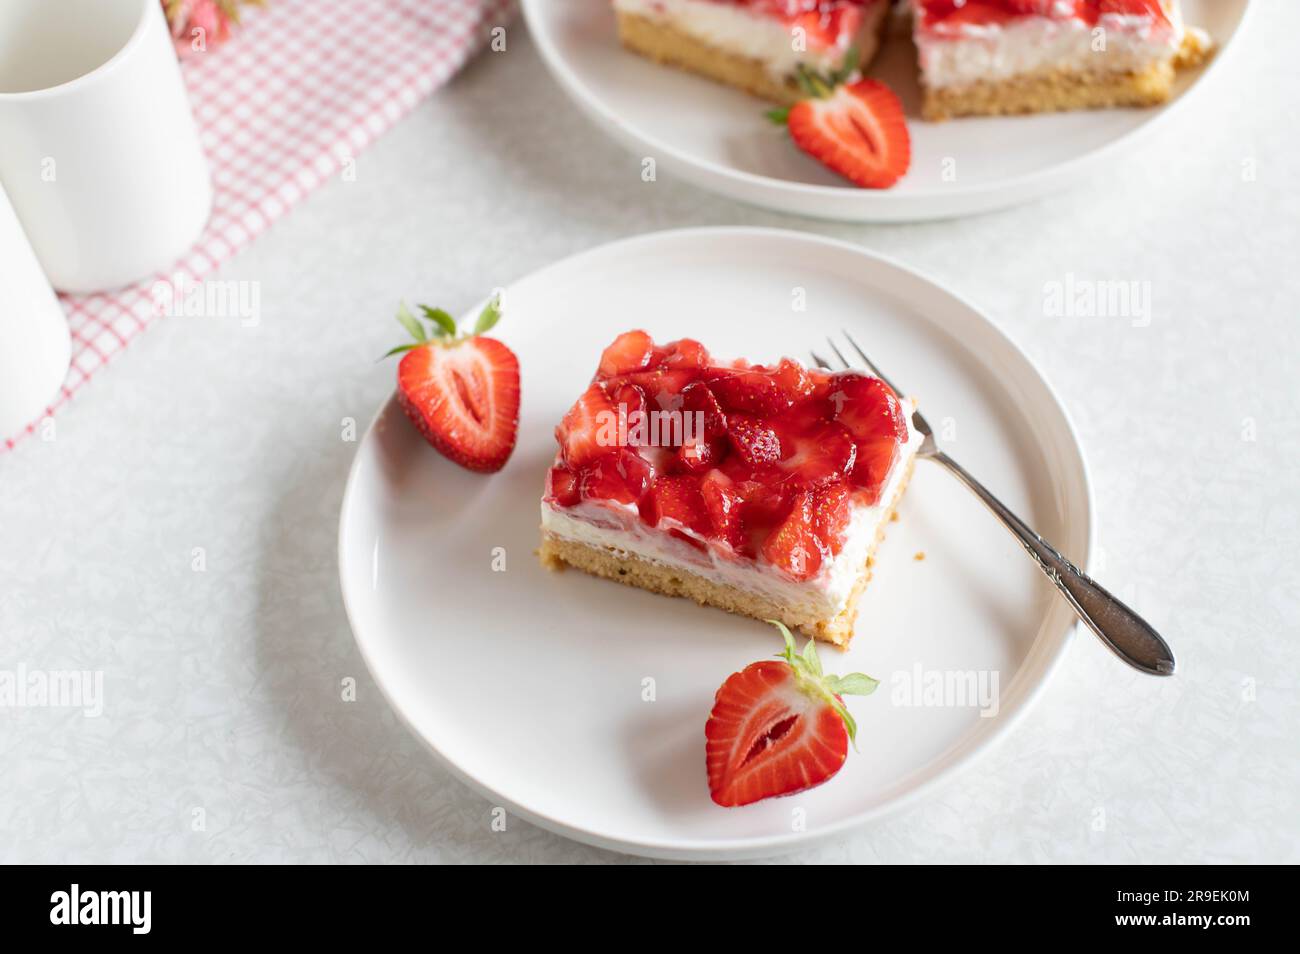 Cake with strawberries, whipped cream and mascarpone cheese on plate Stock Photo